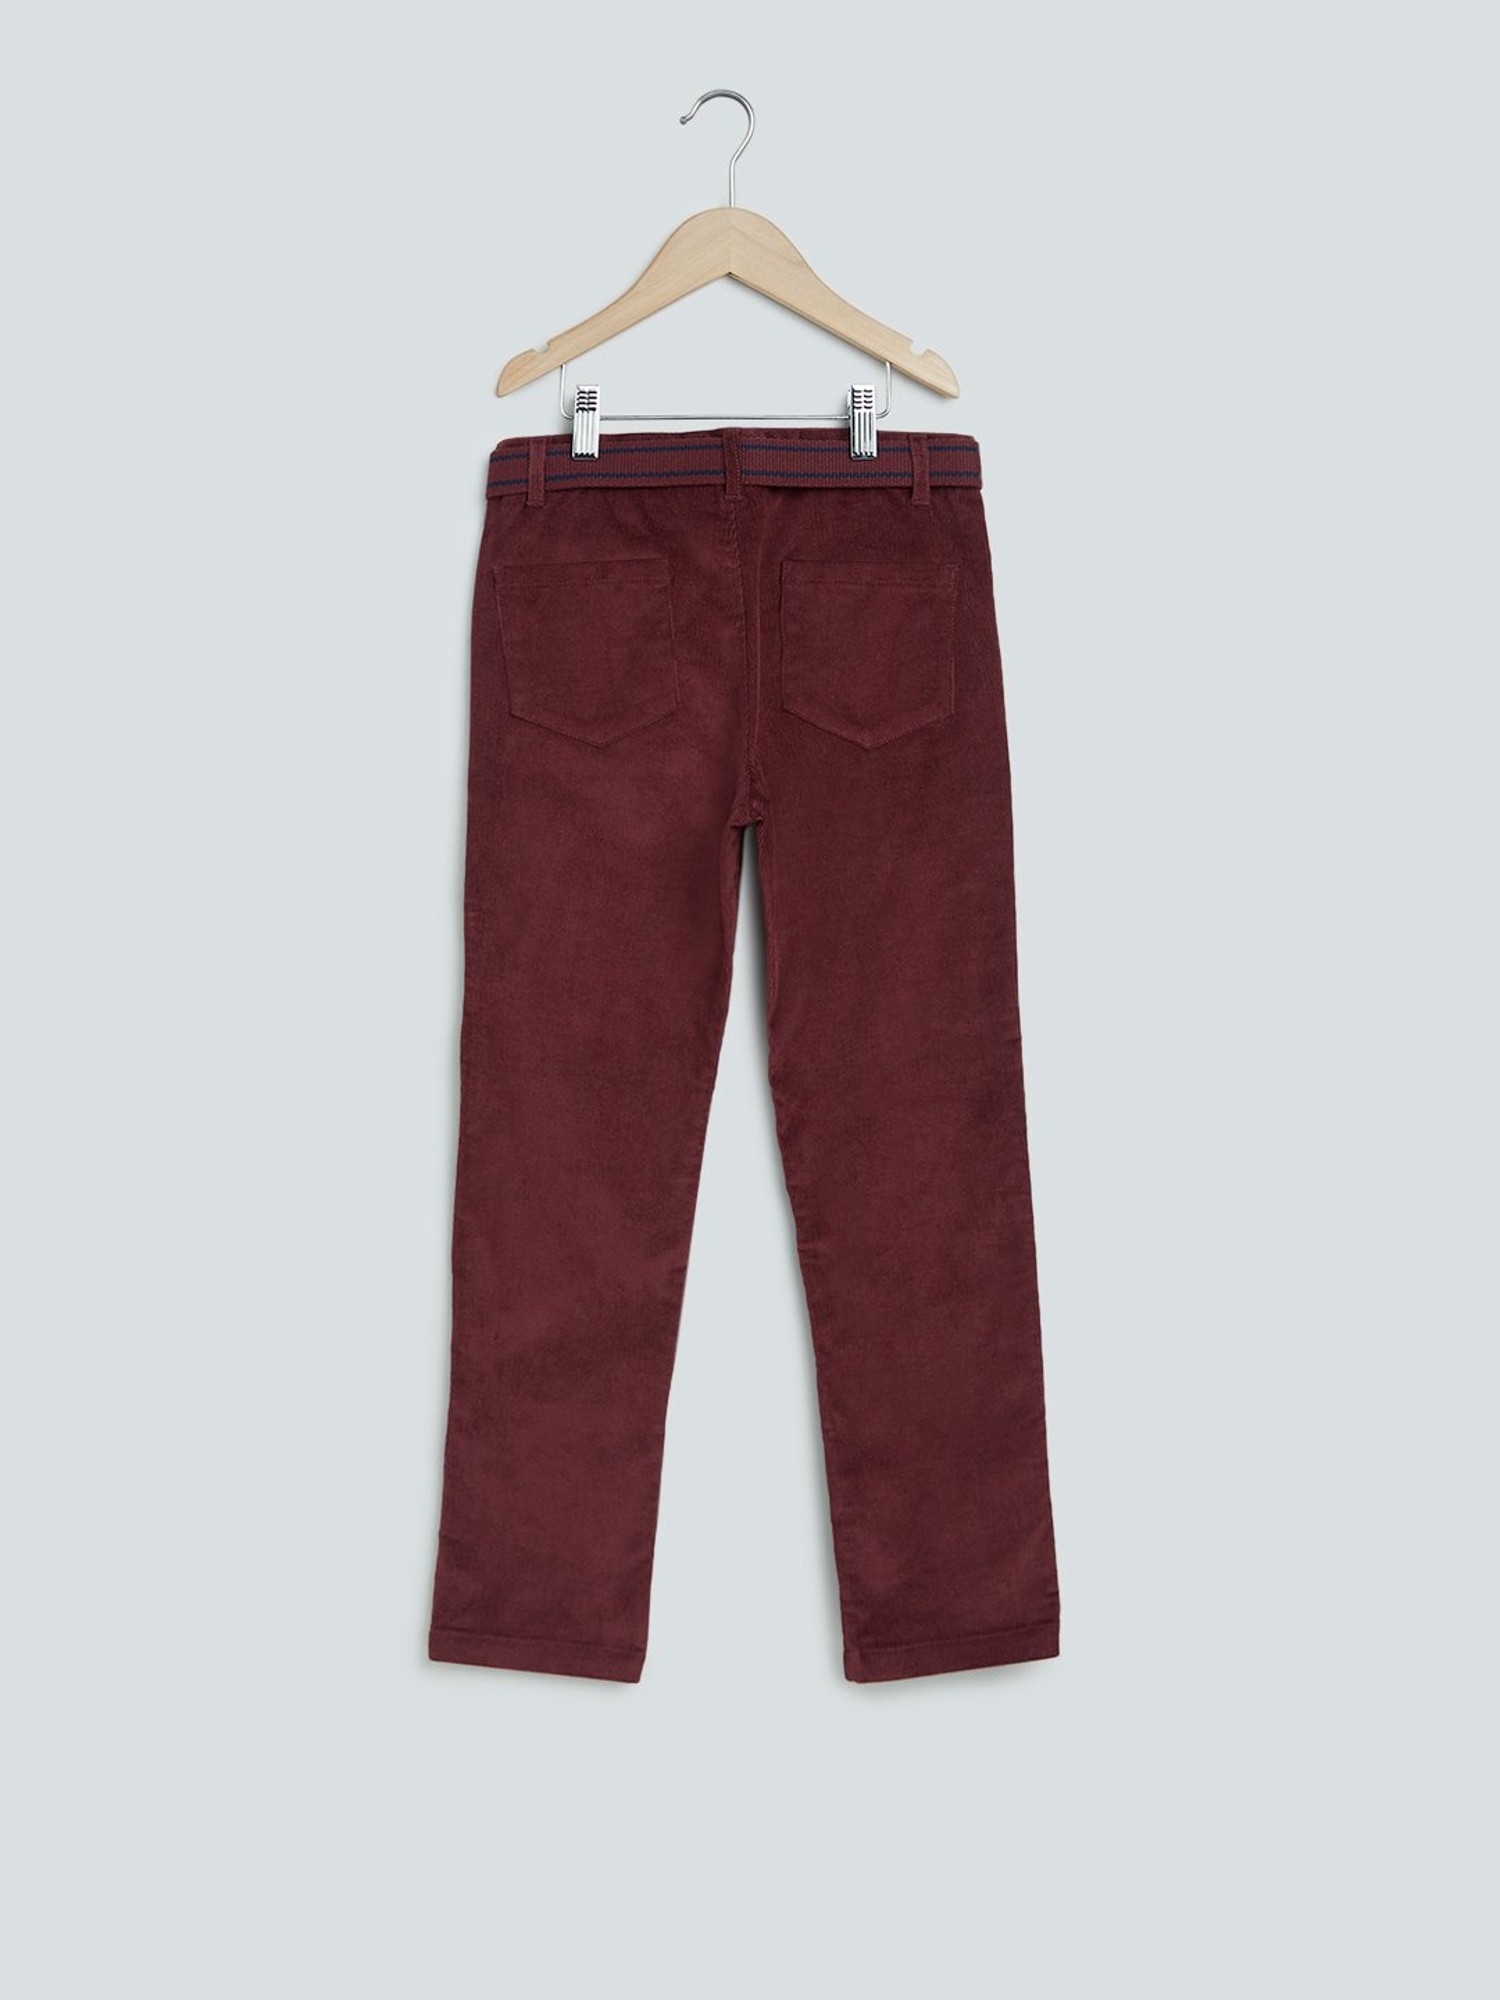 Review Never Established Chino Trousers Size XS 34 36… - Gem